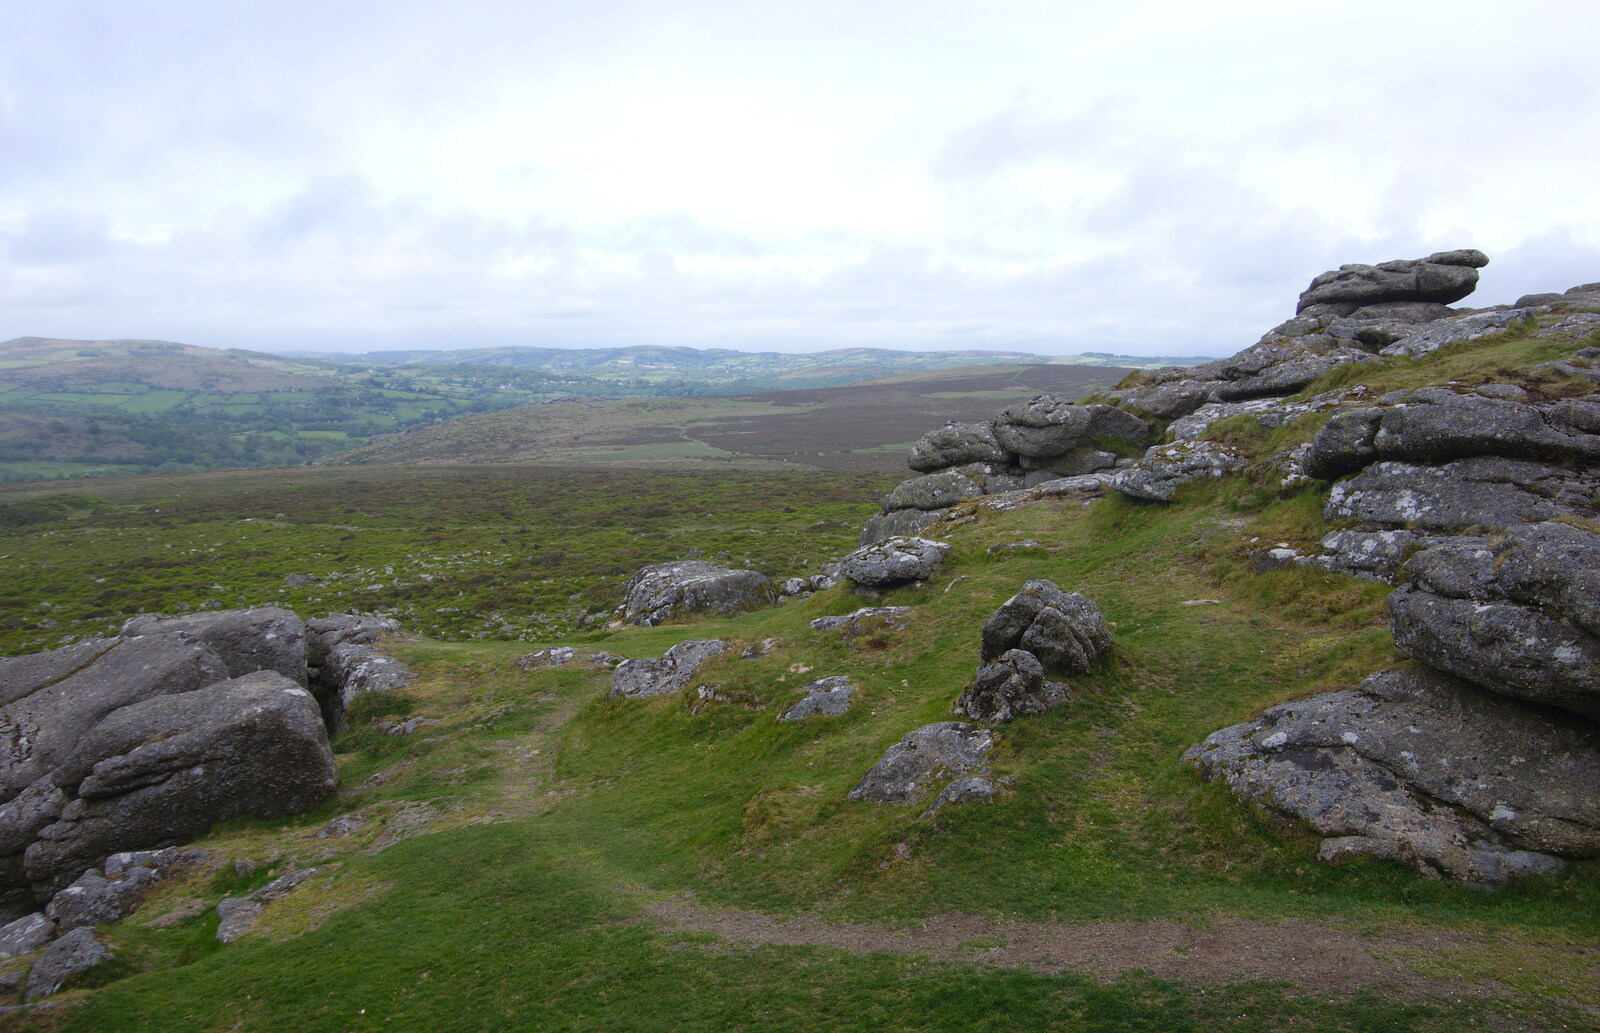 Another view of Dartmoor from The Tom Cobley and a Return to Haytor, Bovey Tracey, Devon - 27th May 2019